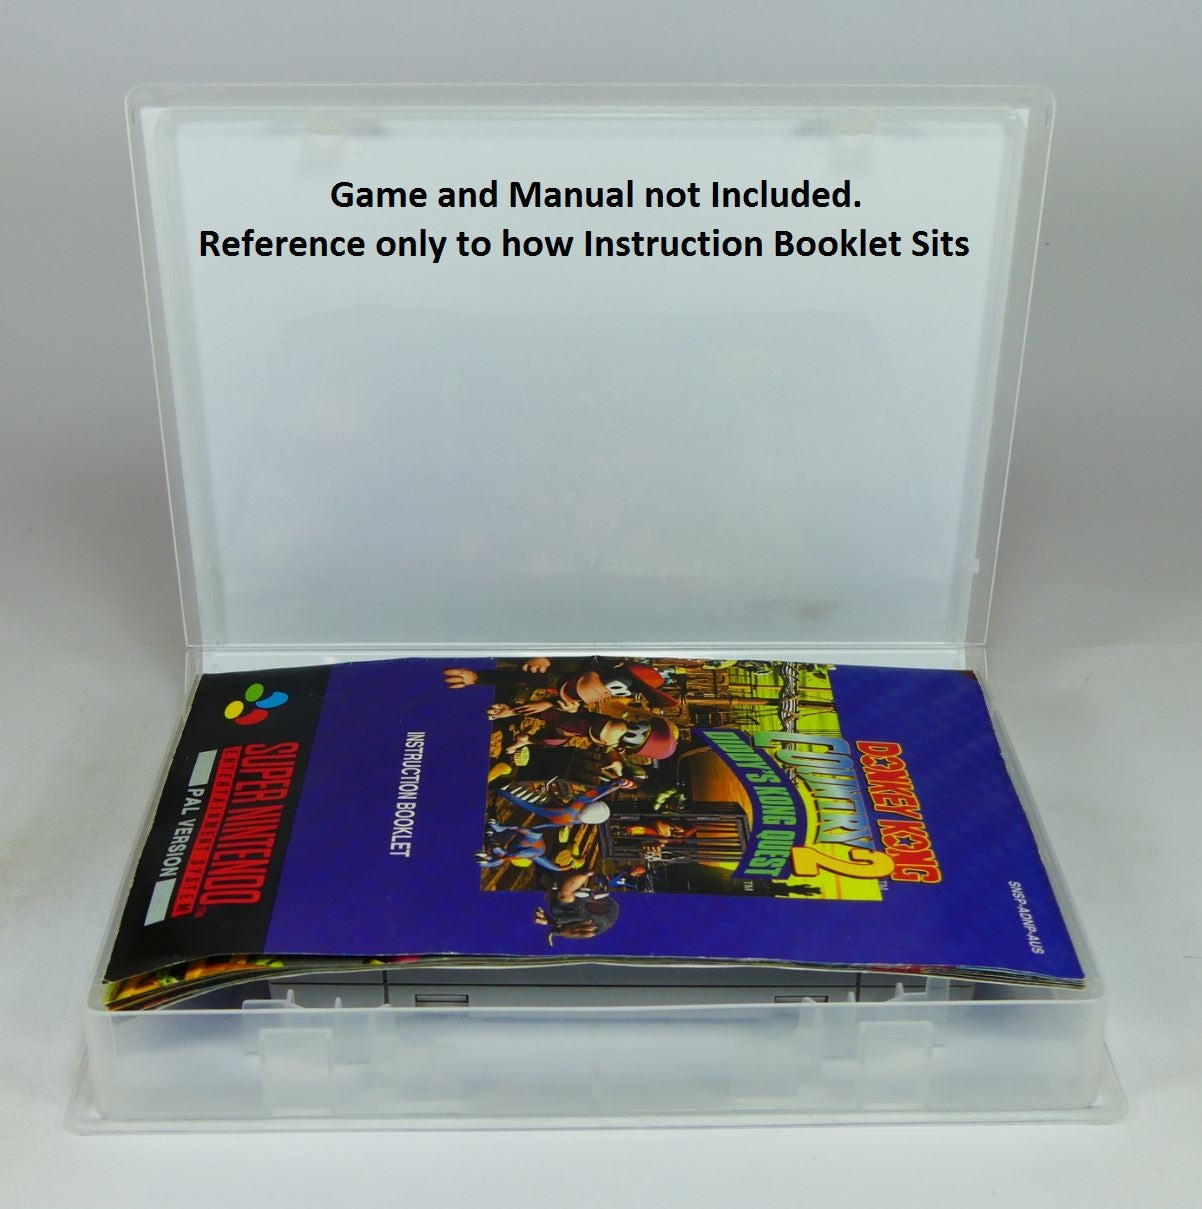 The Jungle Book - SNES Replacement Case